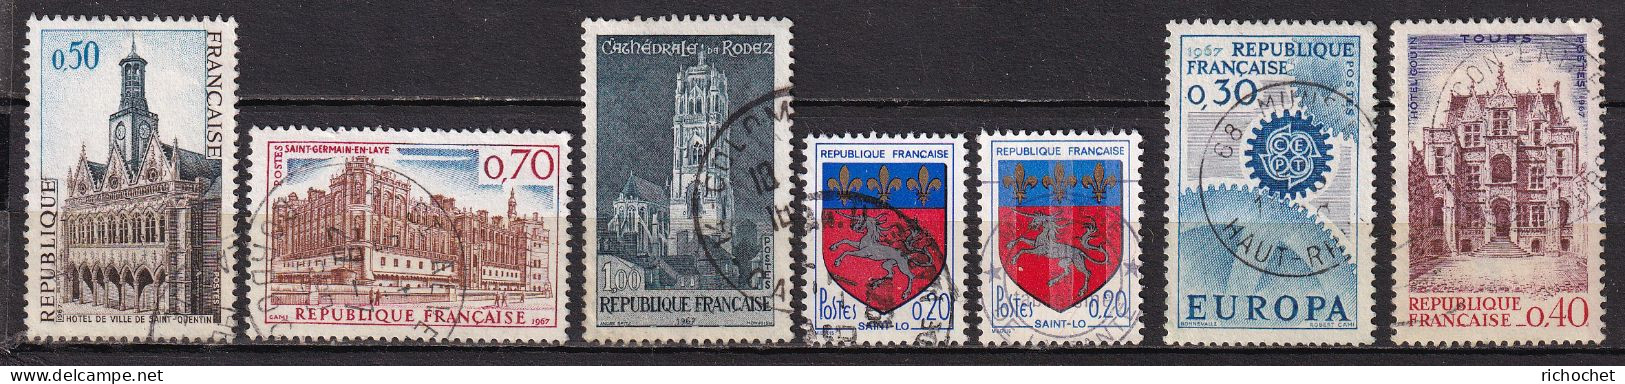 France 1499 + 1501 + 1504 + 1510 + 1510c + 1521 + 1525  ° - Used Stamps